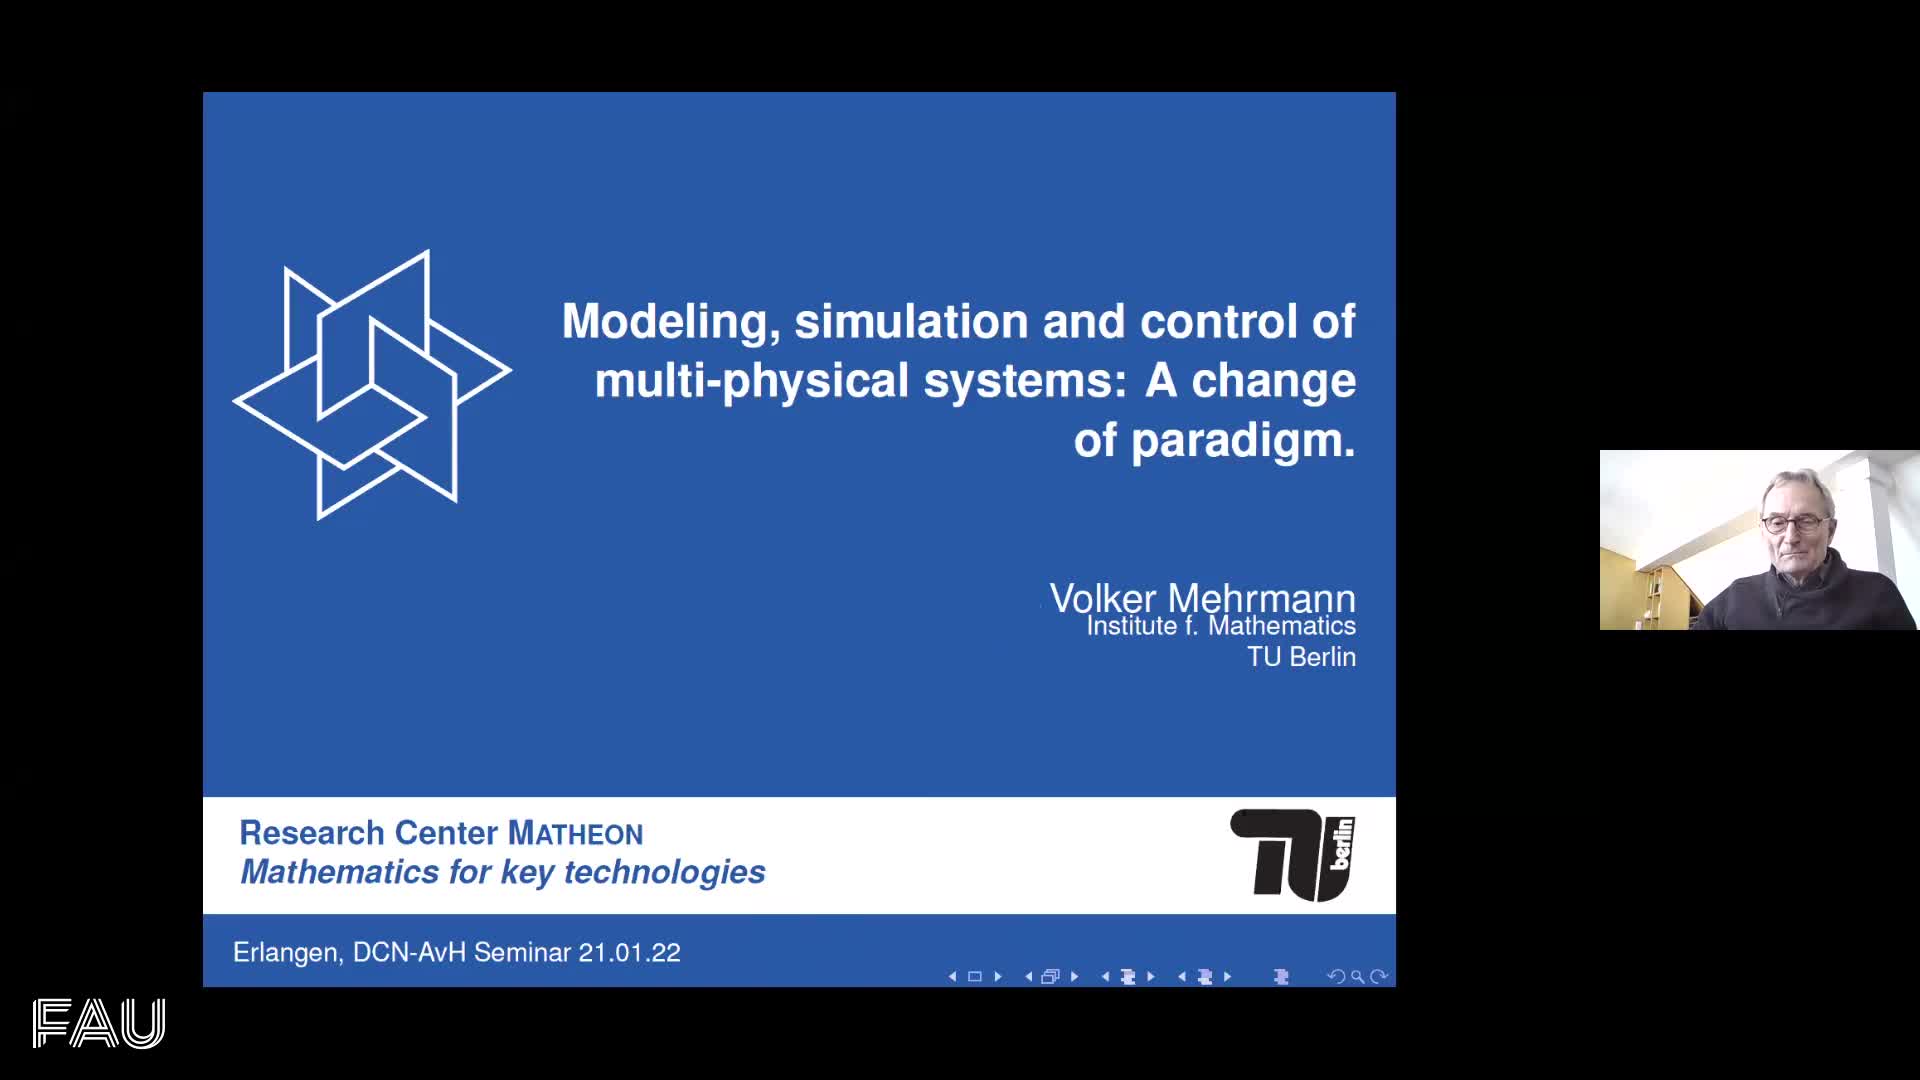 Modeling, simulation and control of multi-physical systems: A change of paradigm (V. Mehrmann, TU Berlin) preview image